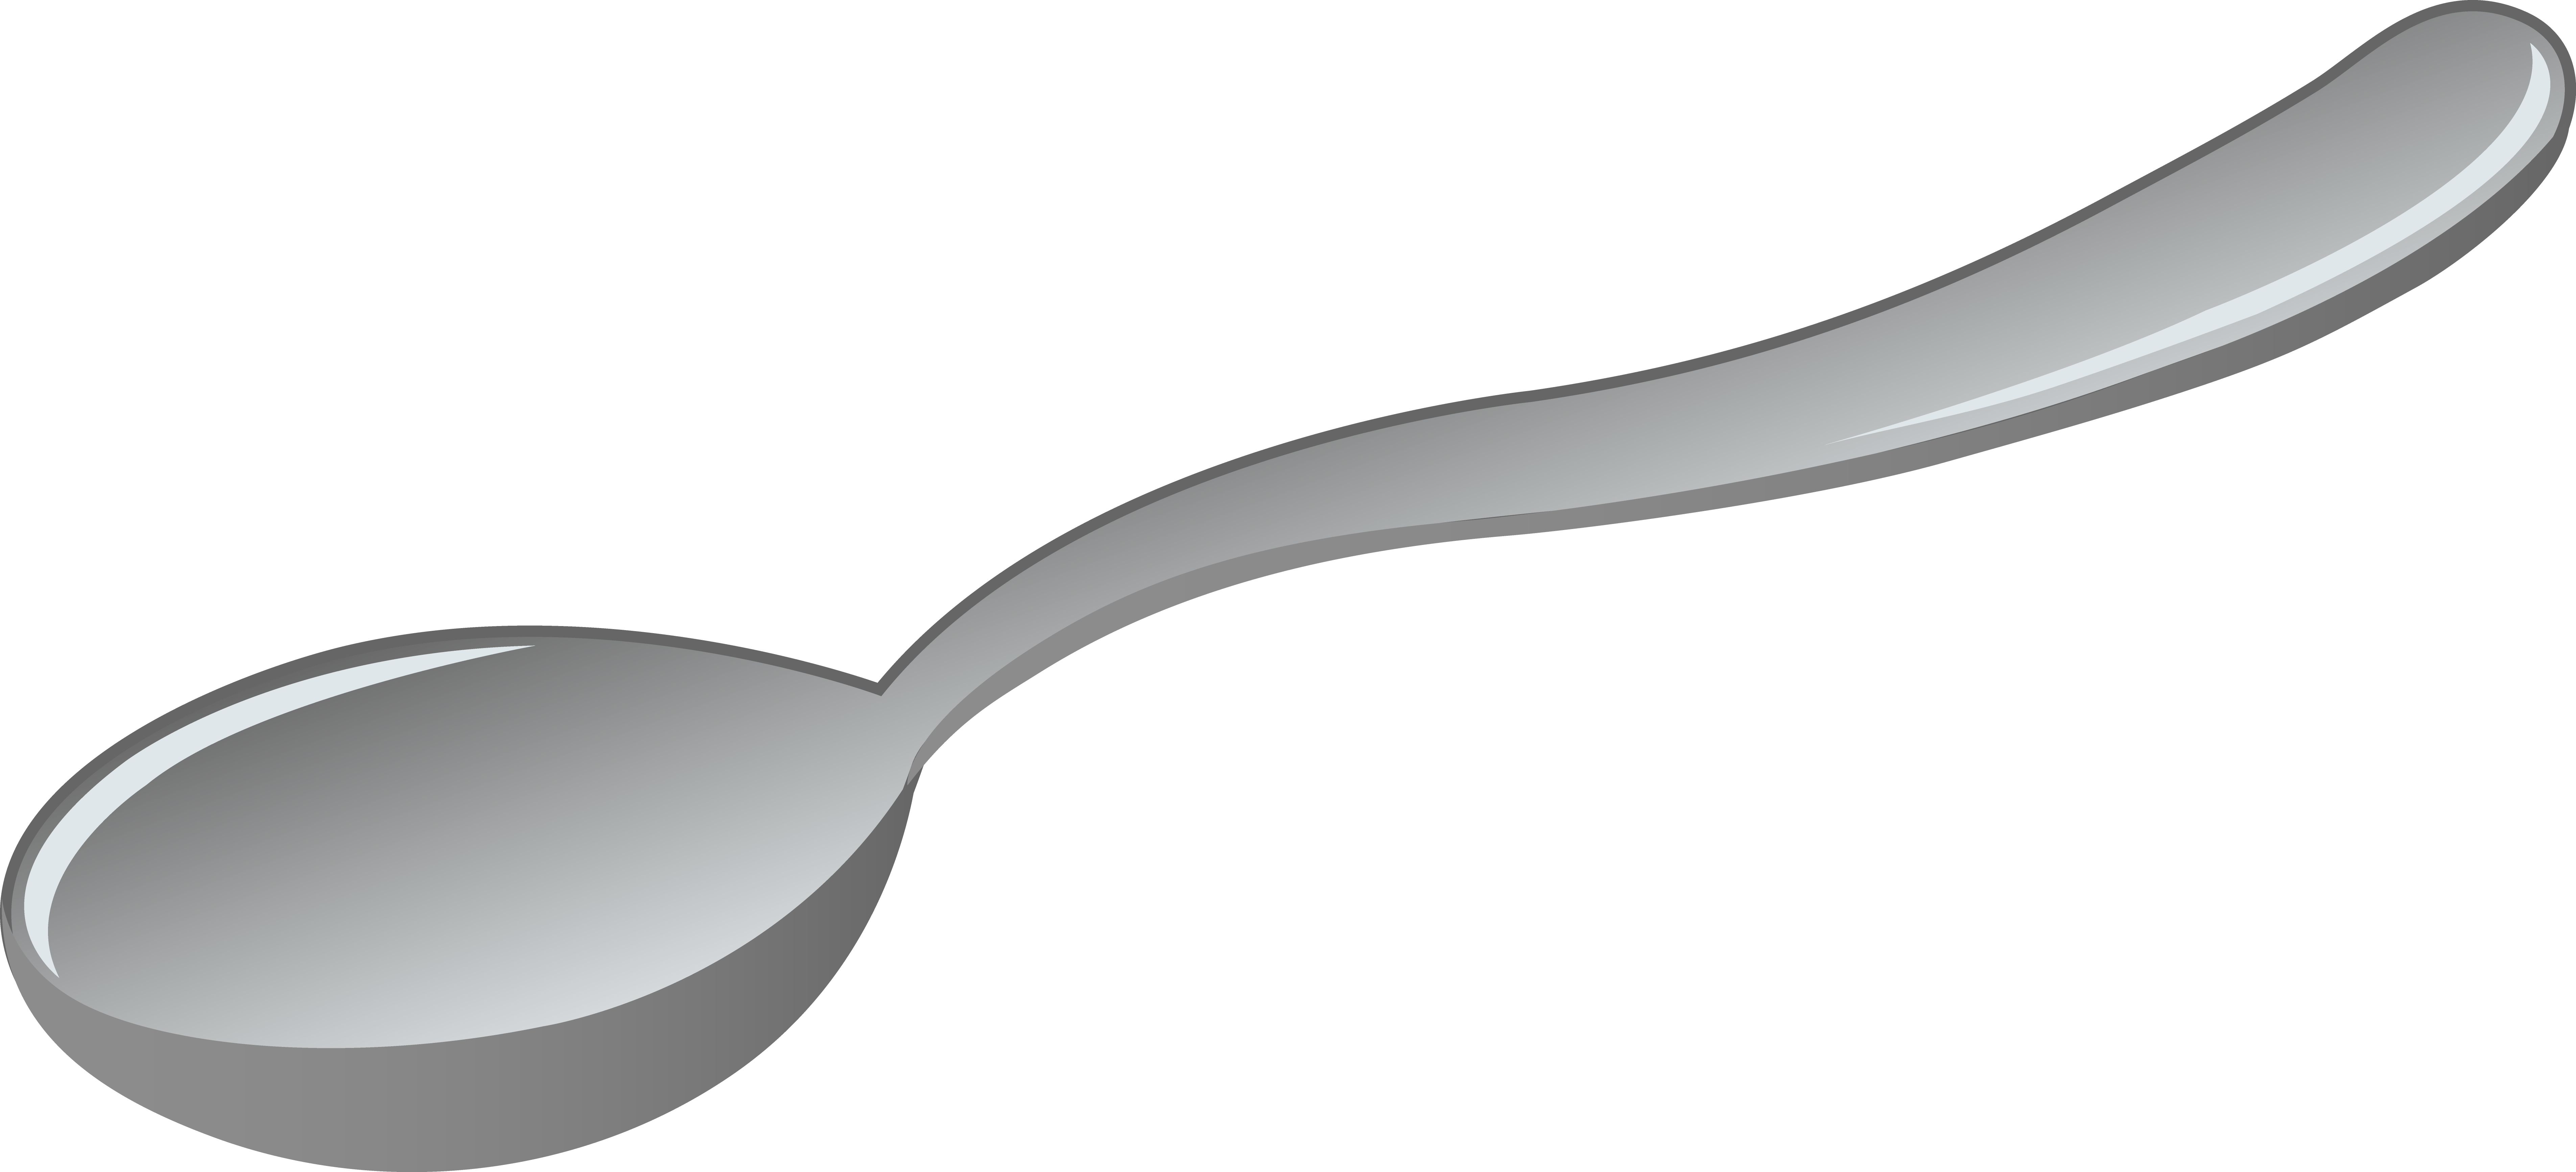  collection of spoon. Dinner clipart plate silverware